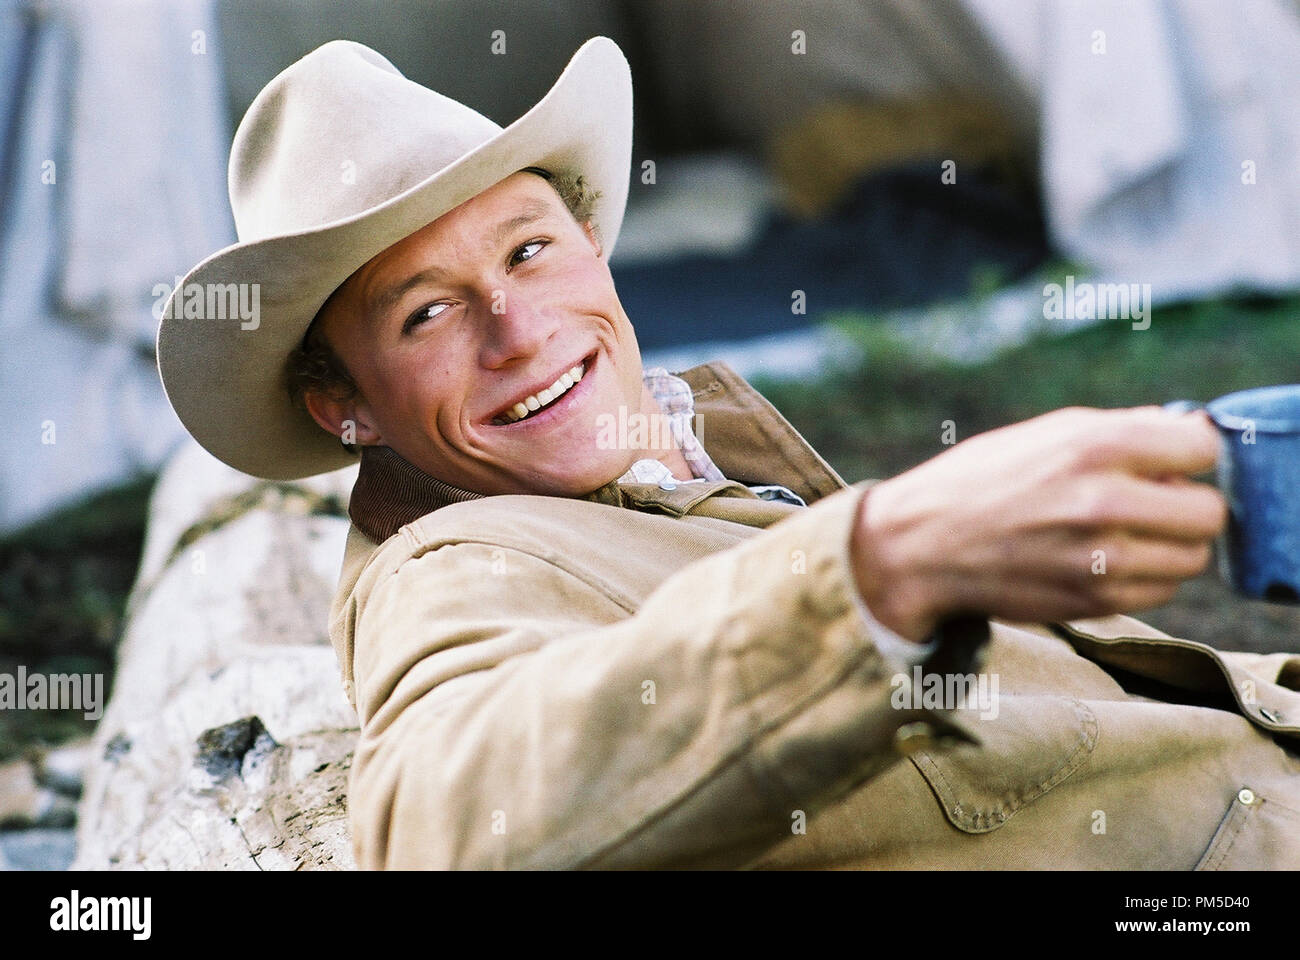 Film Still / Publicity Still from 'Brokeback Mountain'  Heath Ledger © 2005 Focus Features  Photo Credit: Kimberley French   File Reference # 307361409THA  For Editorial Use Only -  All Rights Reserved Stock Photo